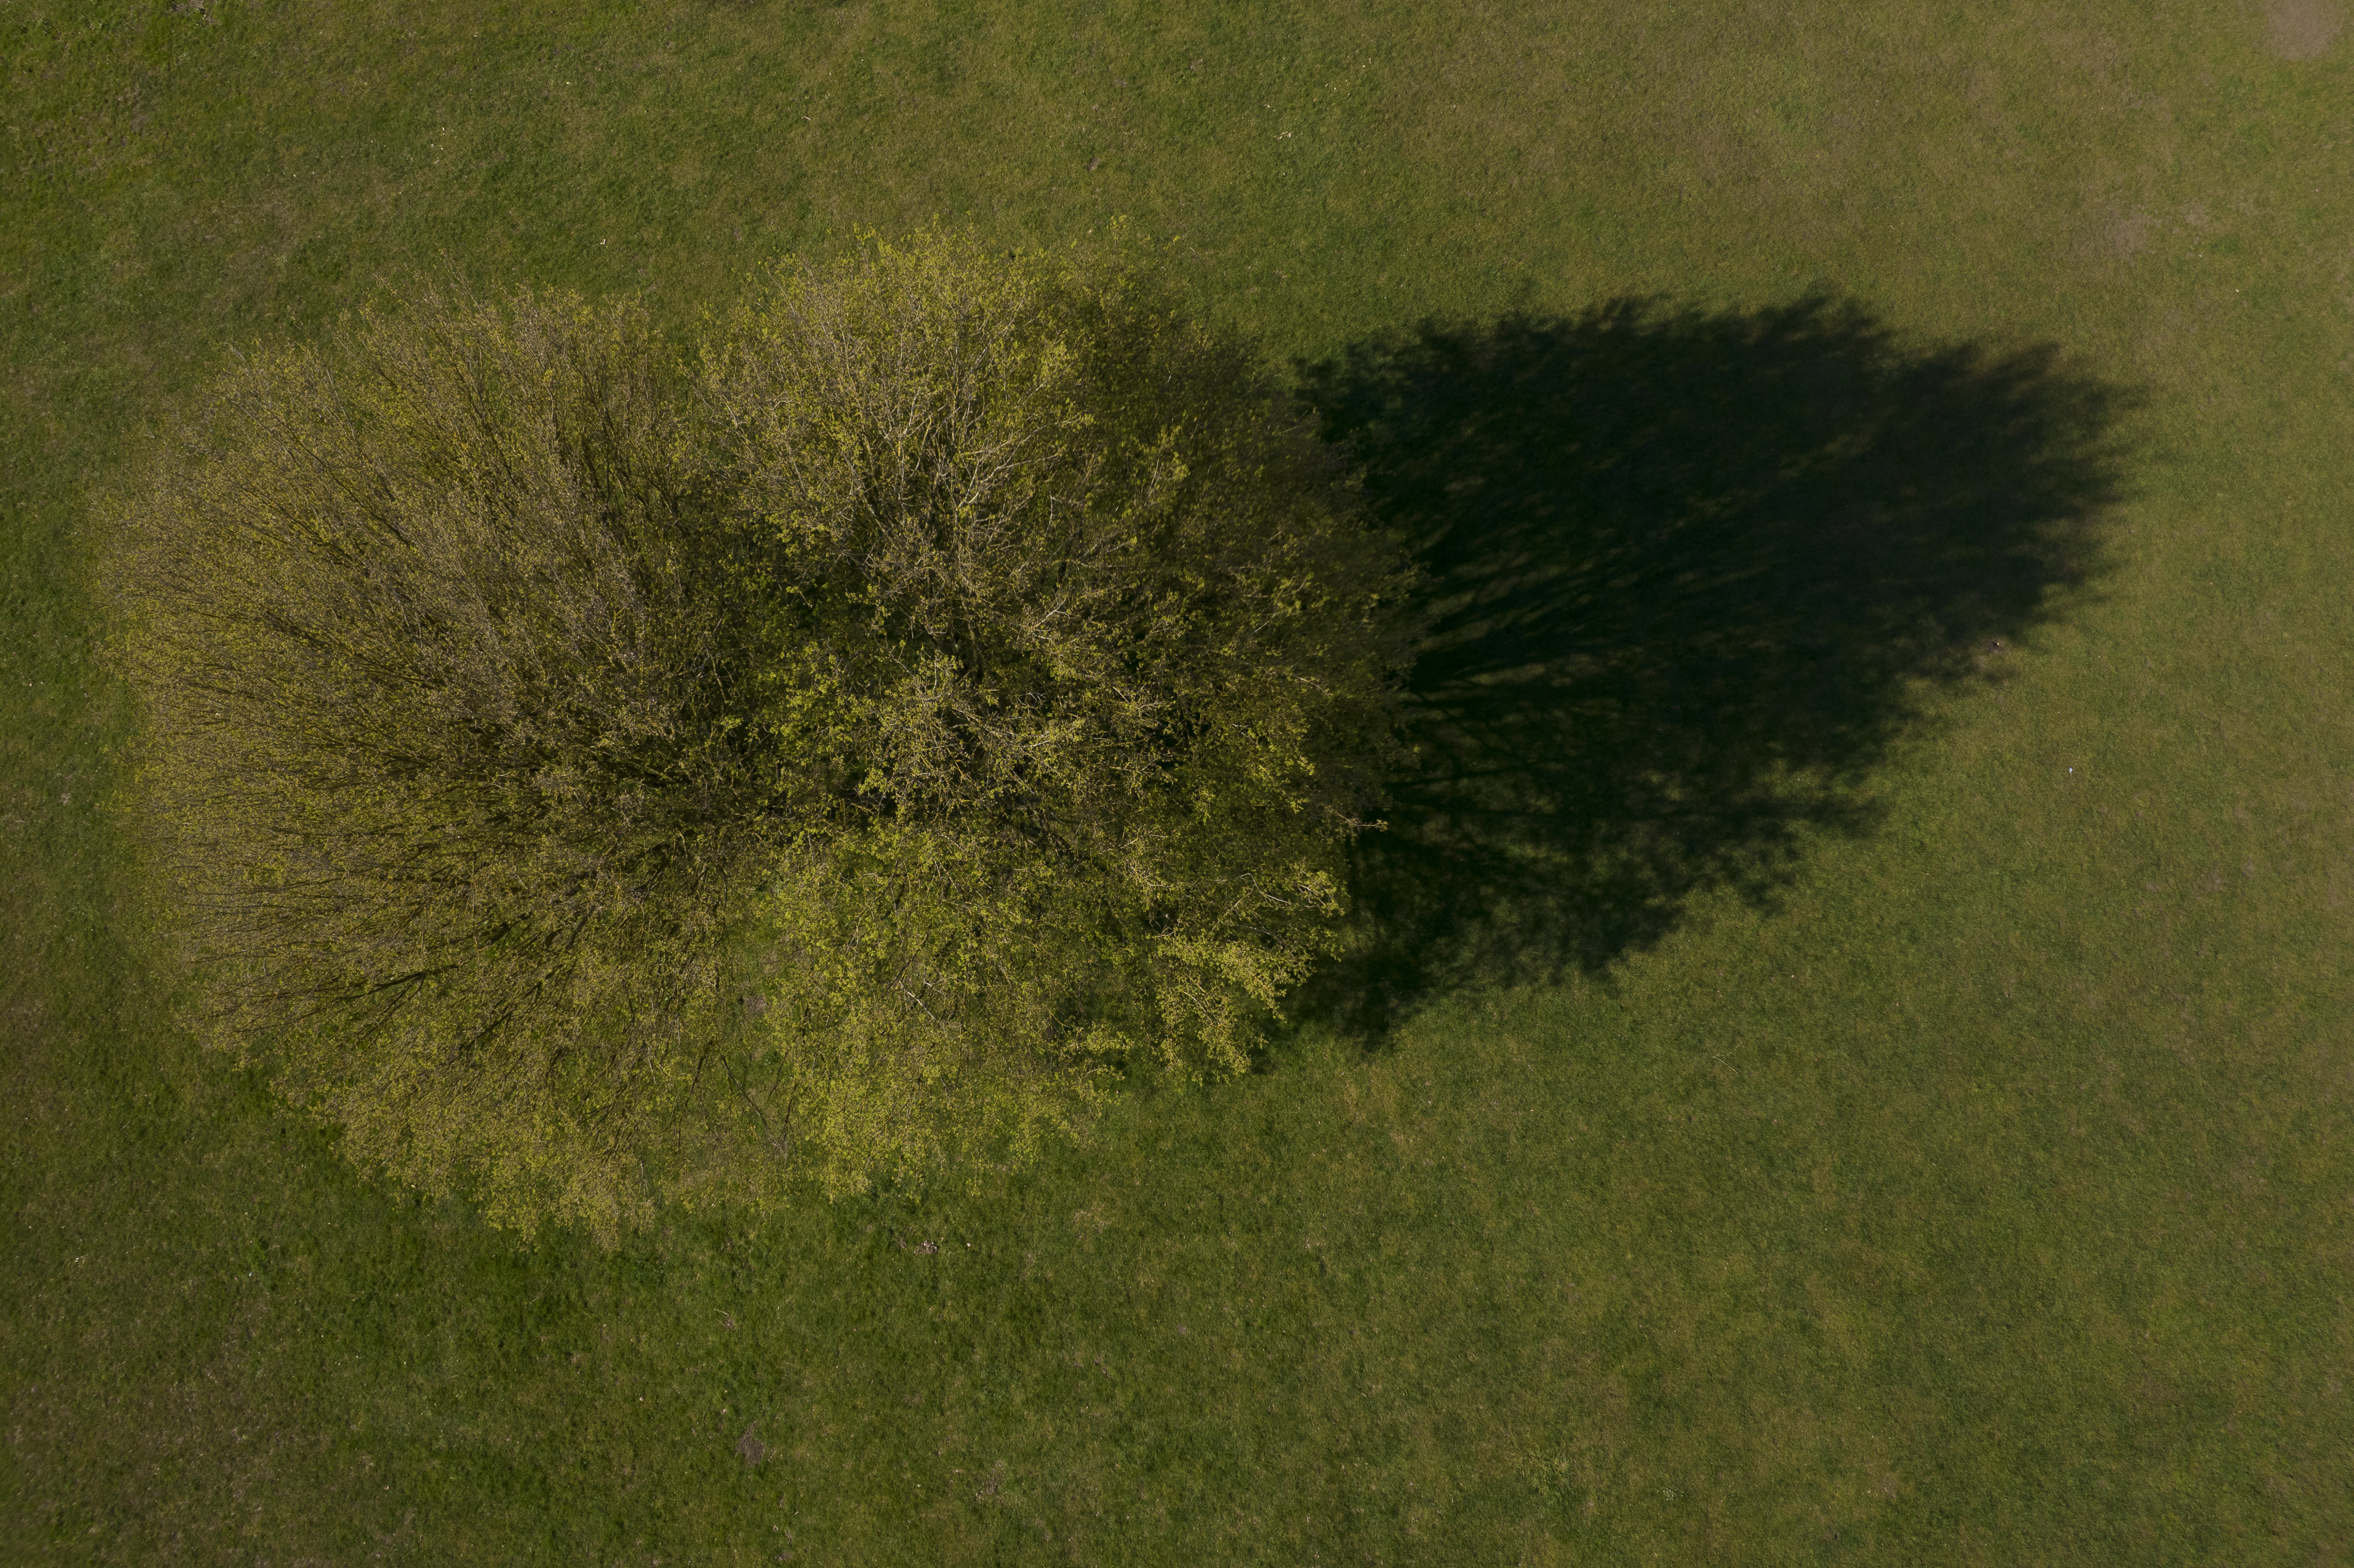 Tree from above, 1/80s, f/2.8, ISO100, 8mm, Angela Nicholson